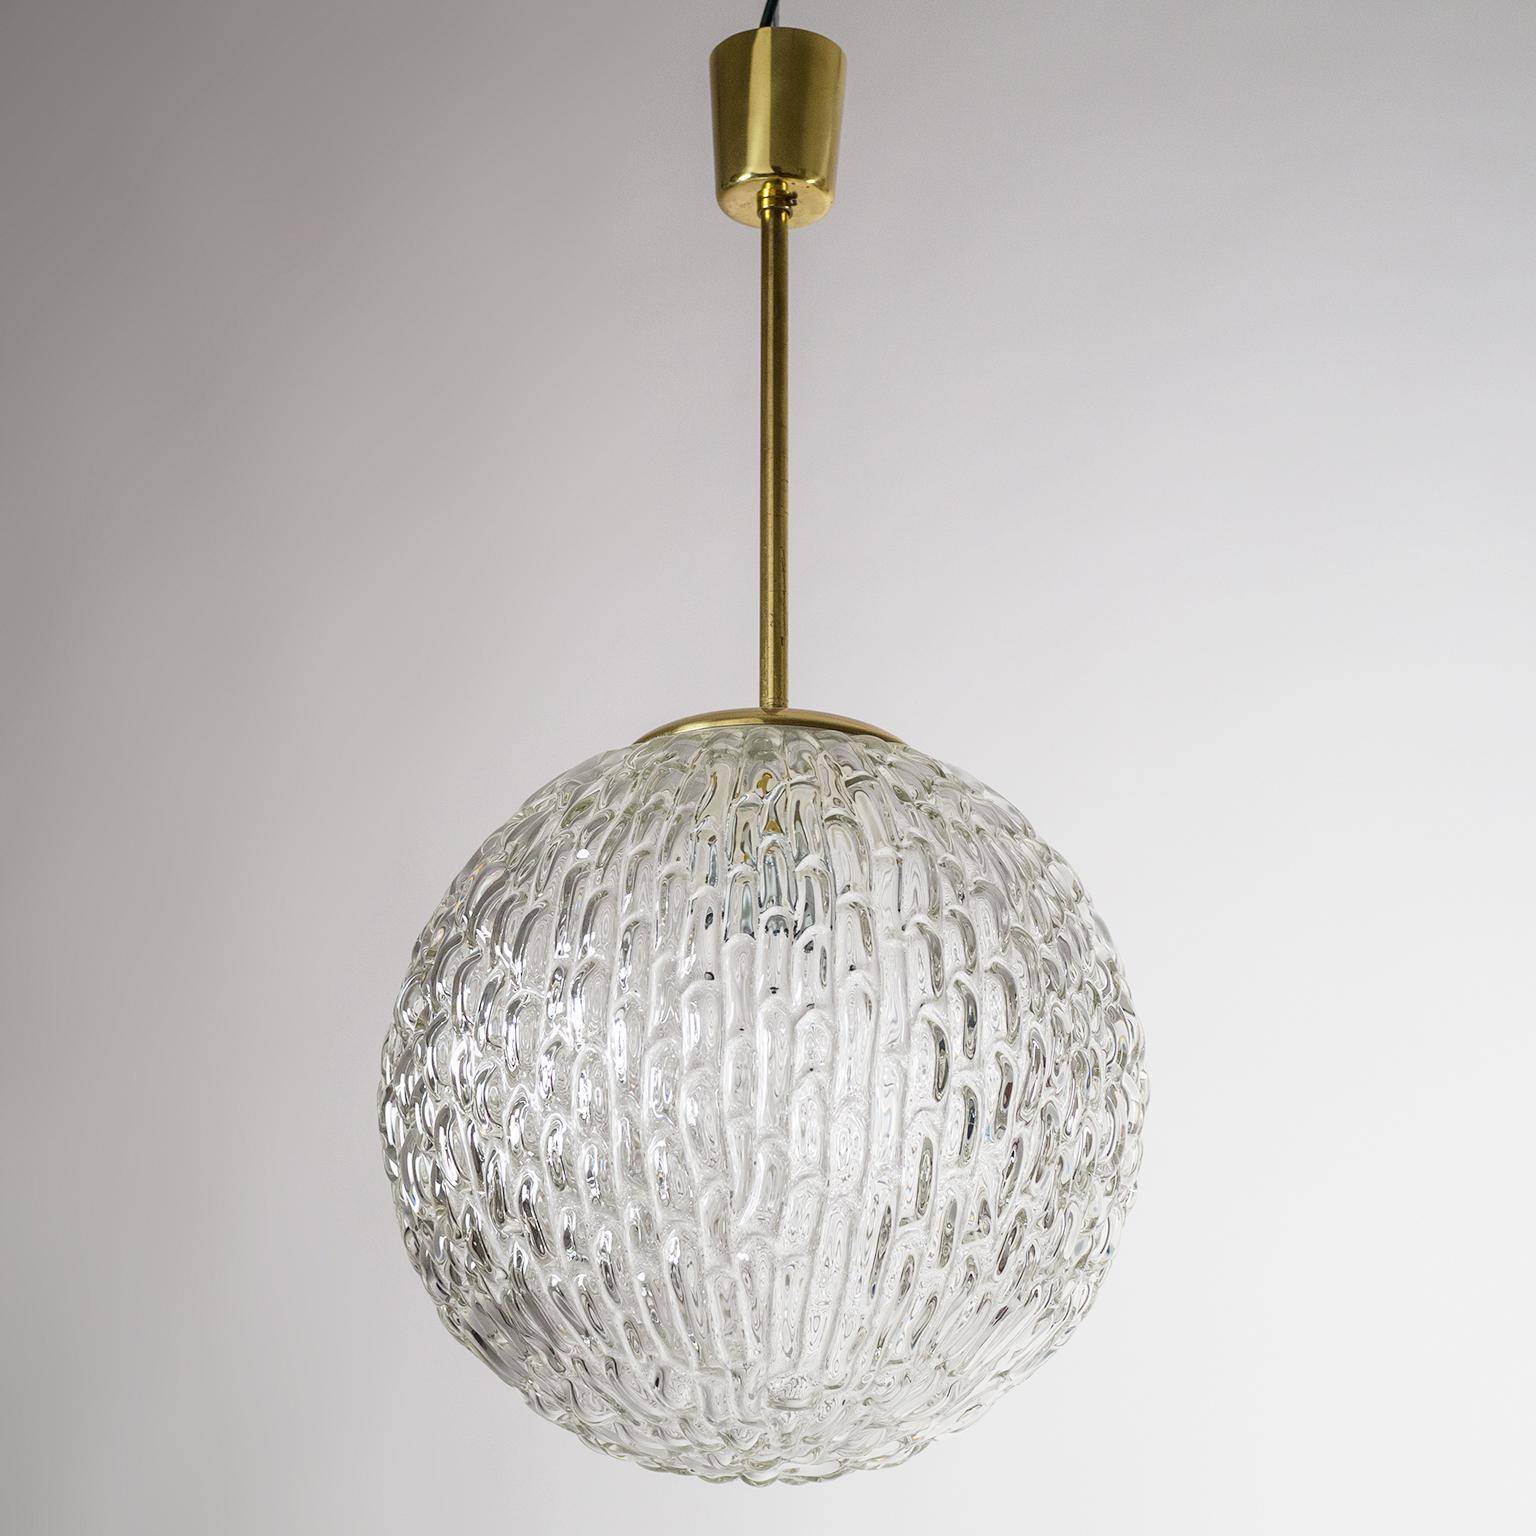 Beautiful Austrian mid-century globe pendant with a very uniquely textured crystal glass body which has an organic, almost liquid feel about it. Fabulous display of light when lit. Very good original condition with a bit of patina on the brass. One